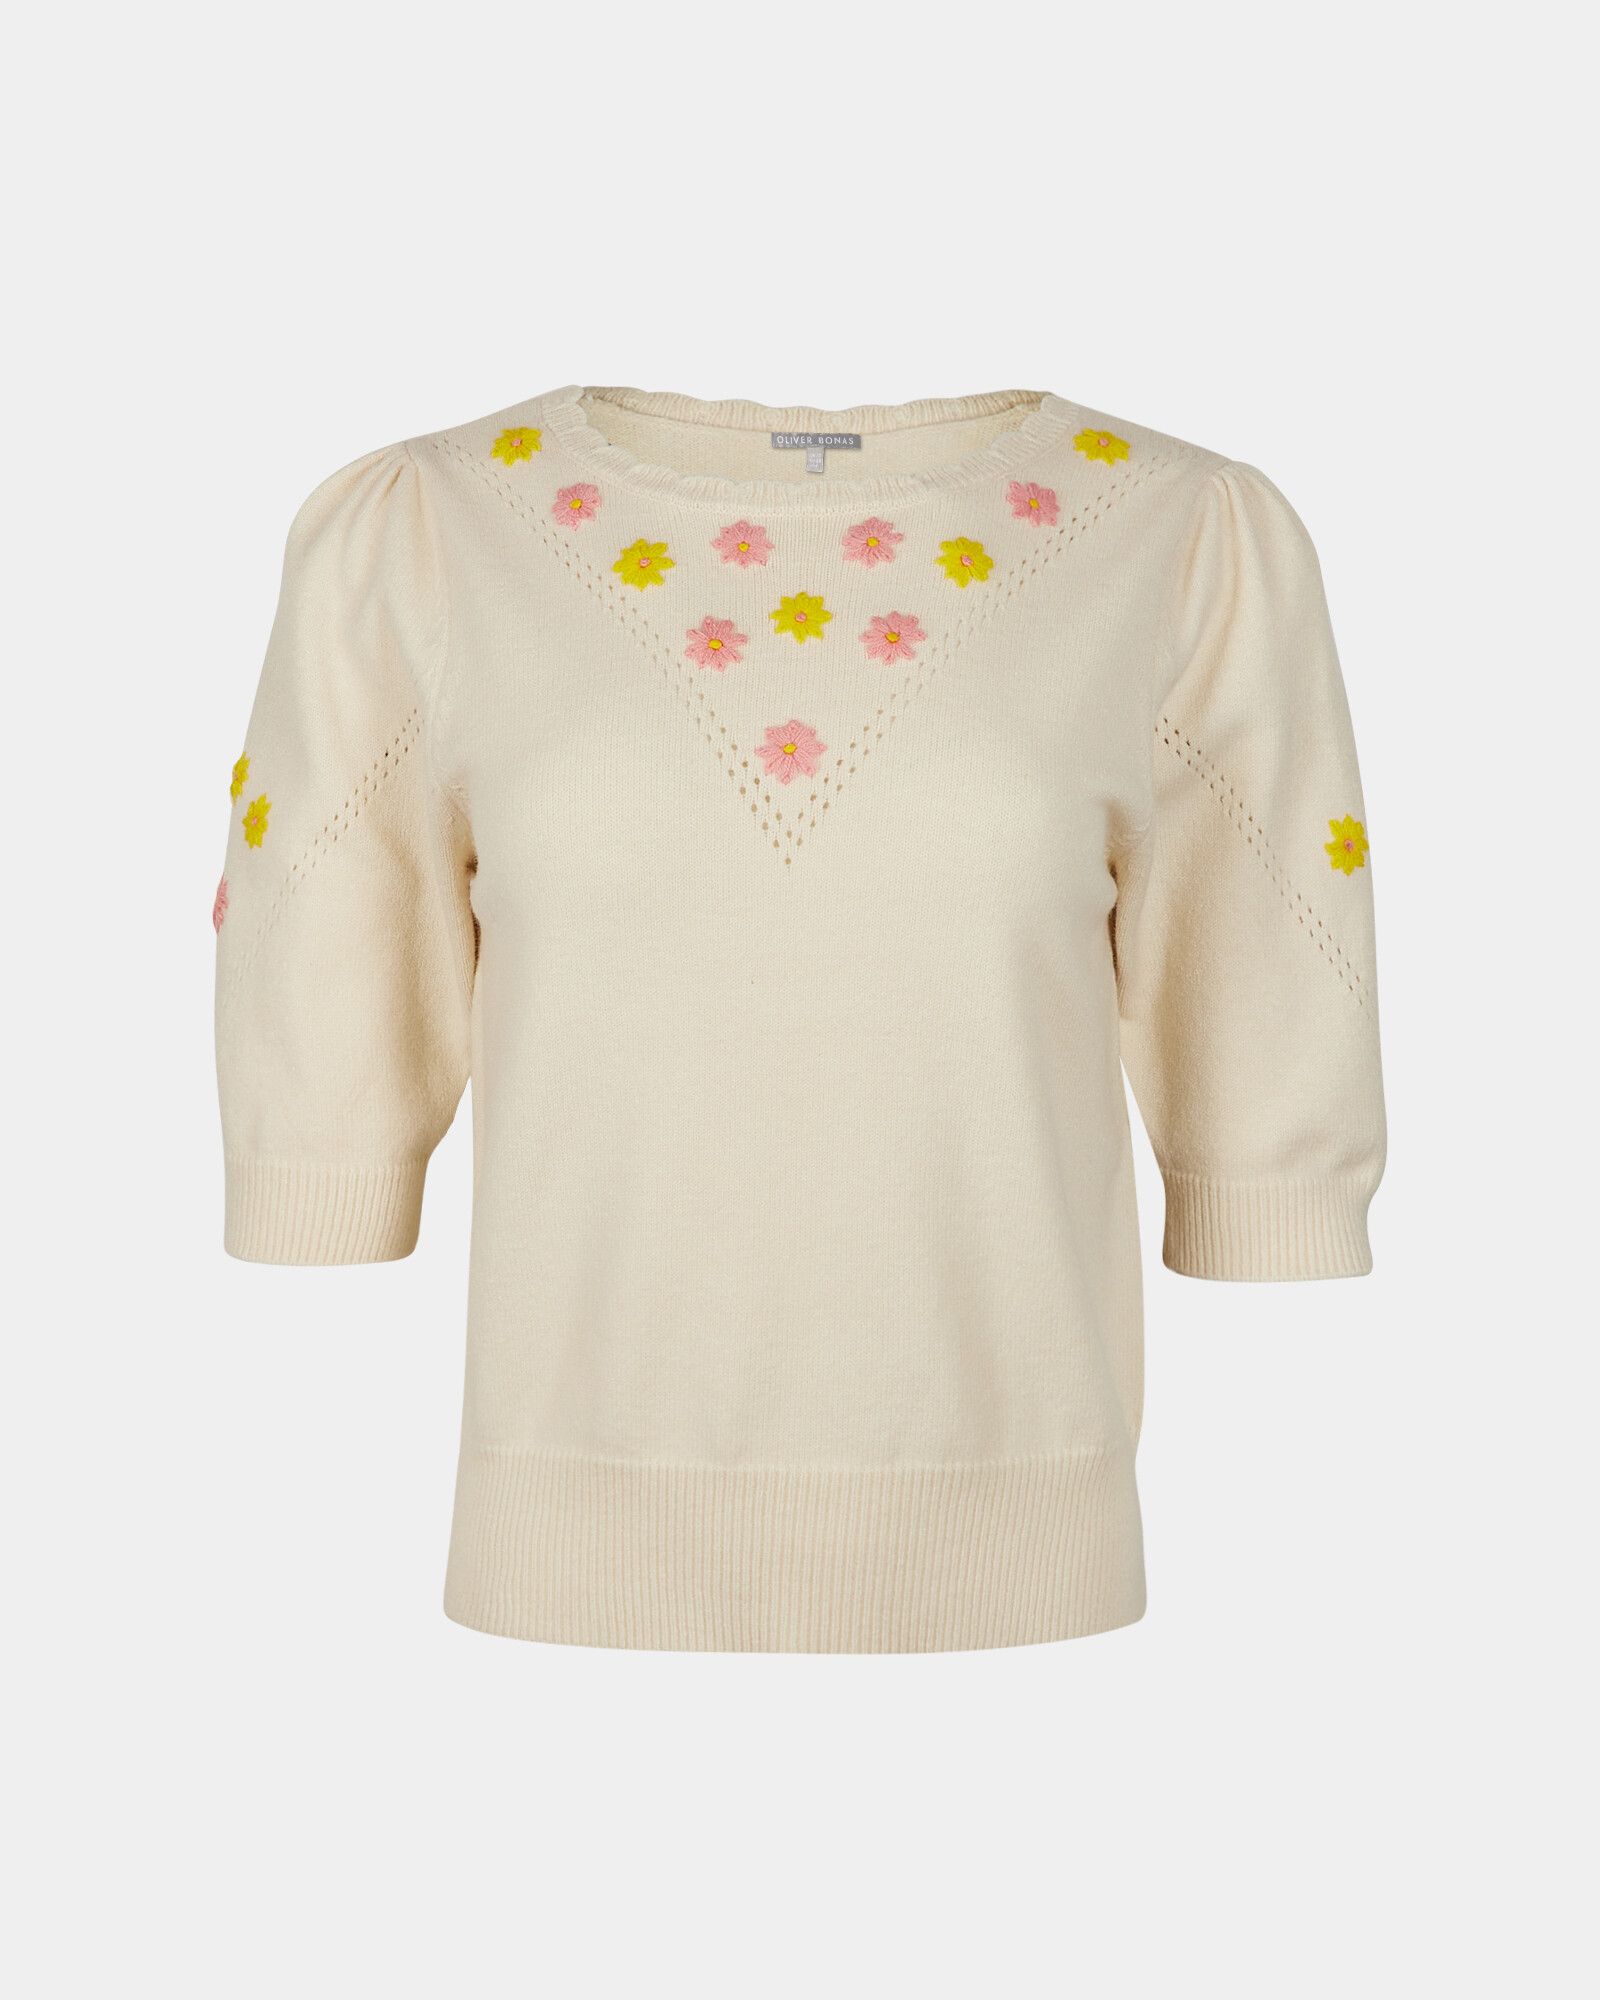 Embroidered Floral & Pointelle Stitch White Knitted Top | Oliver Bonas